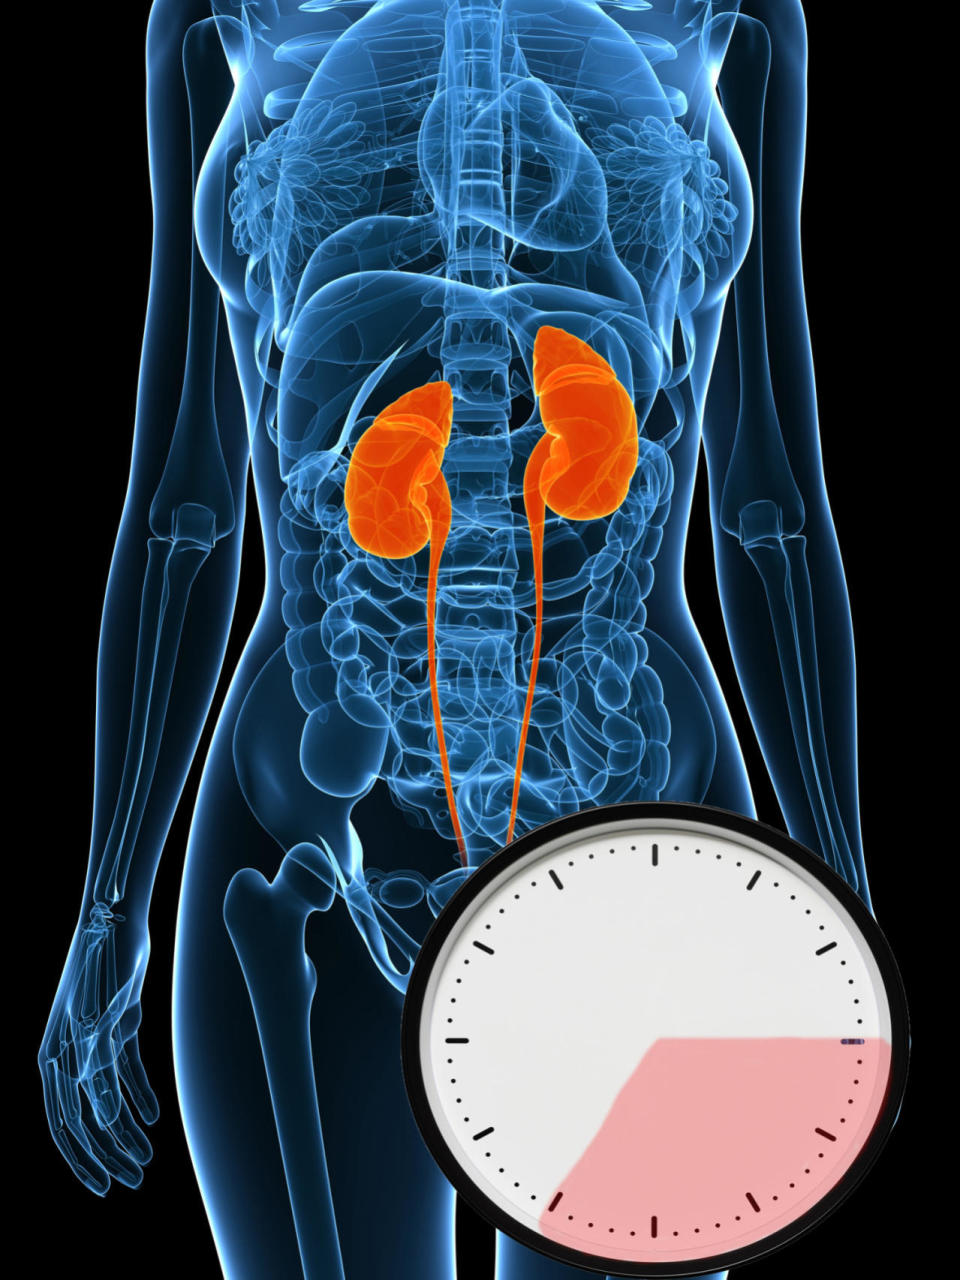 3 to 7 p.m.: Kidneys and bladder